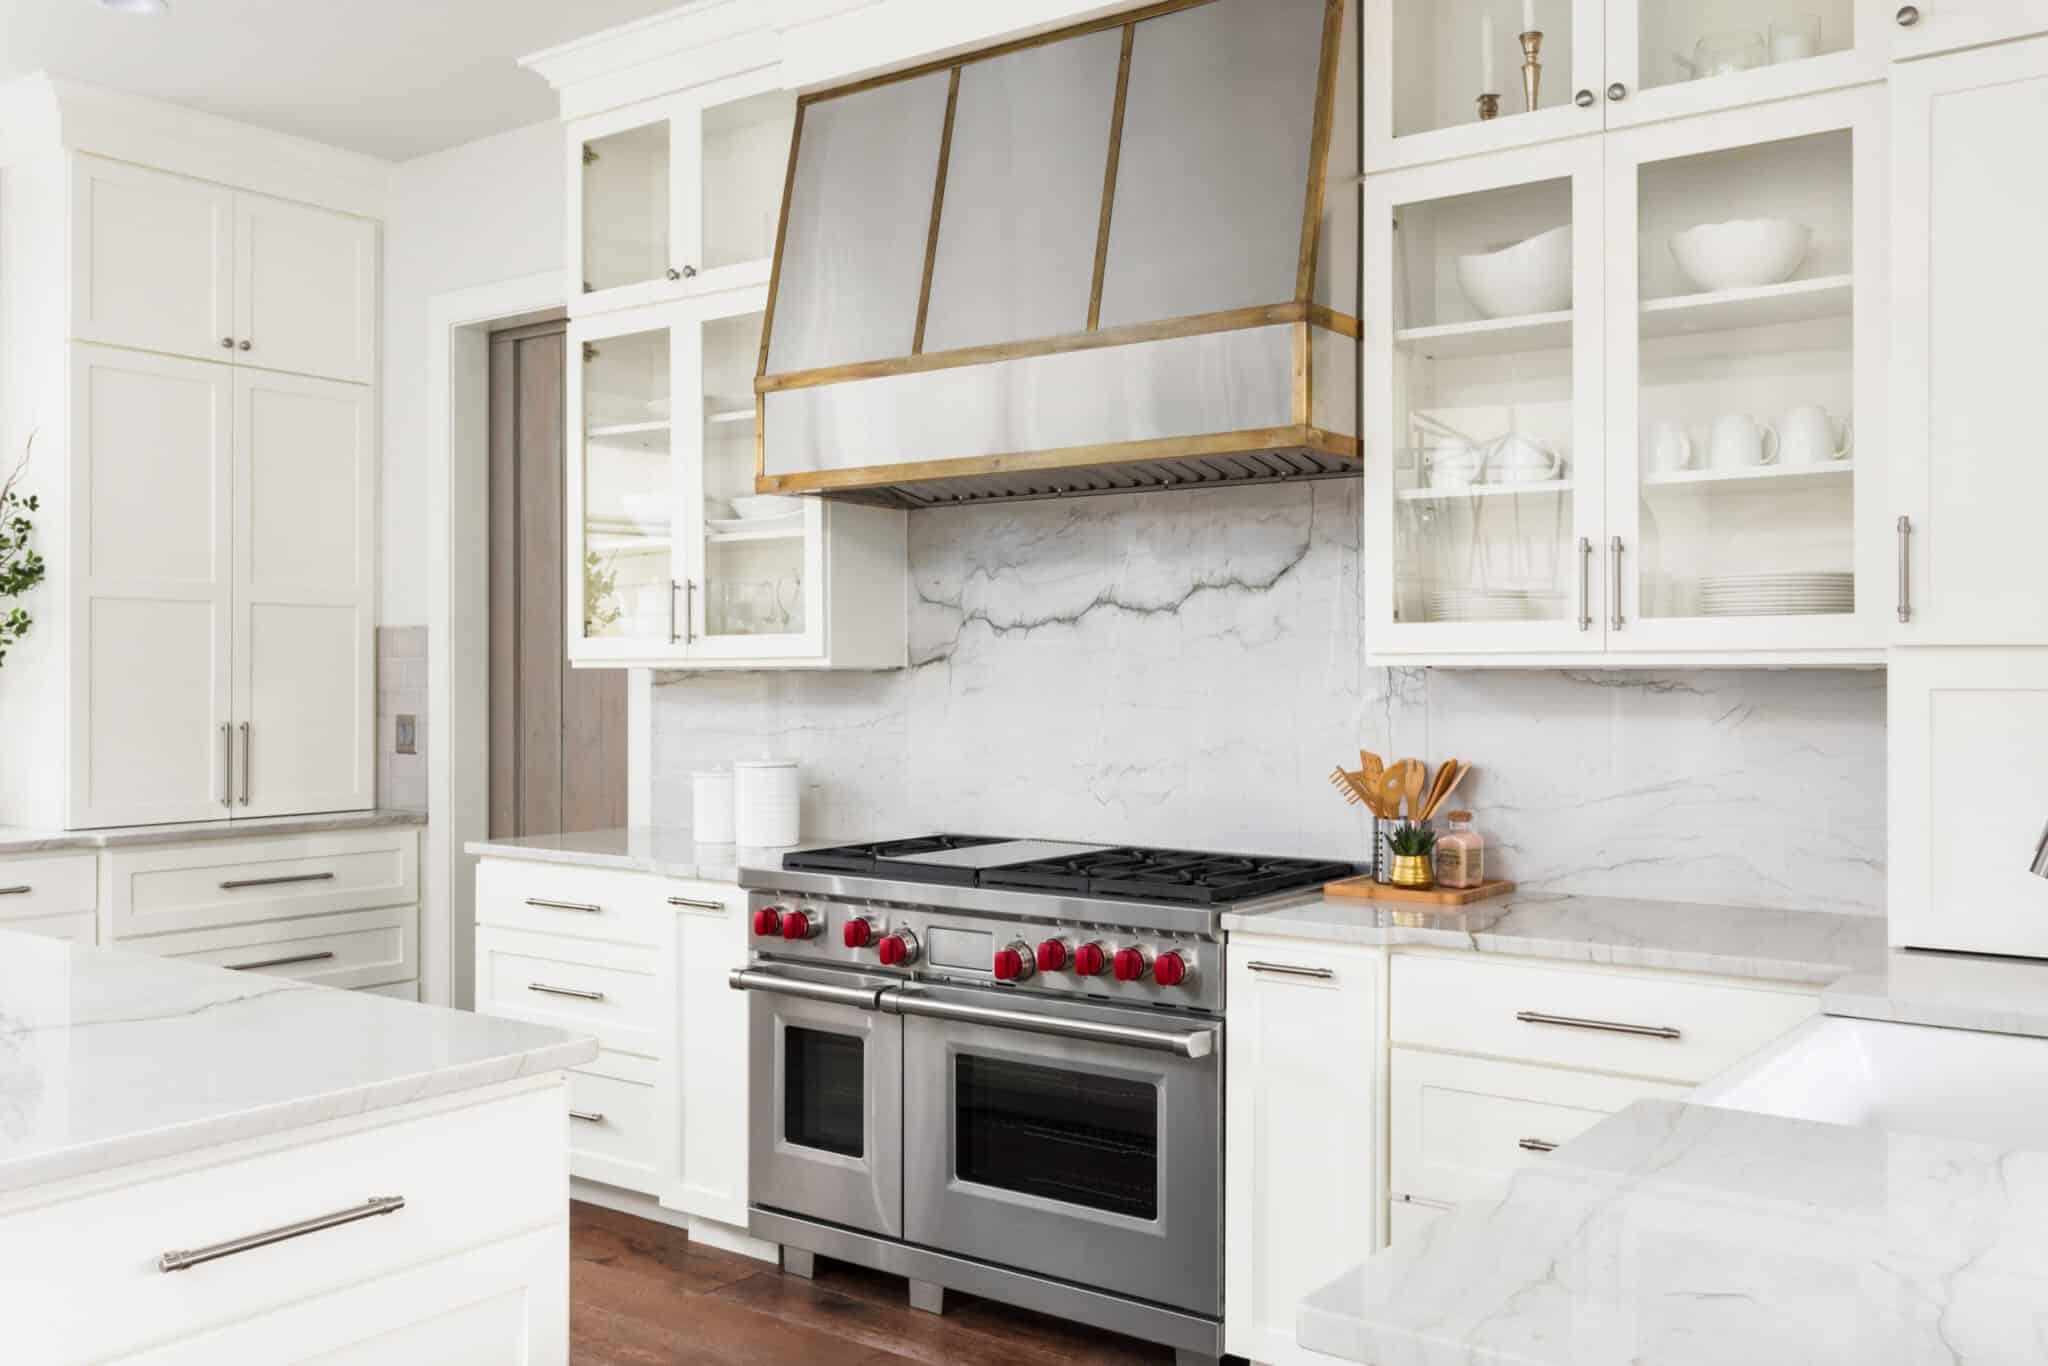 White painted glass cabinets in a remodeled kitchen.